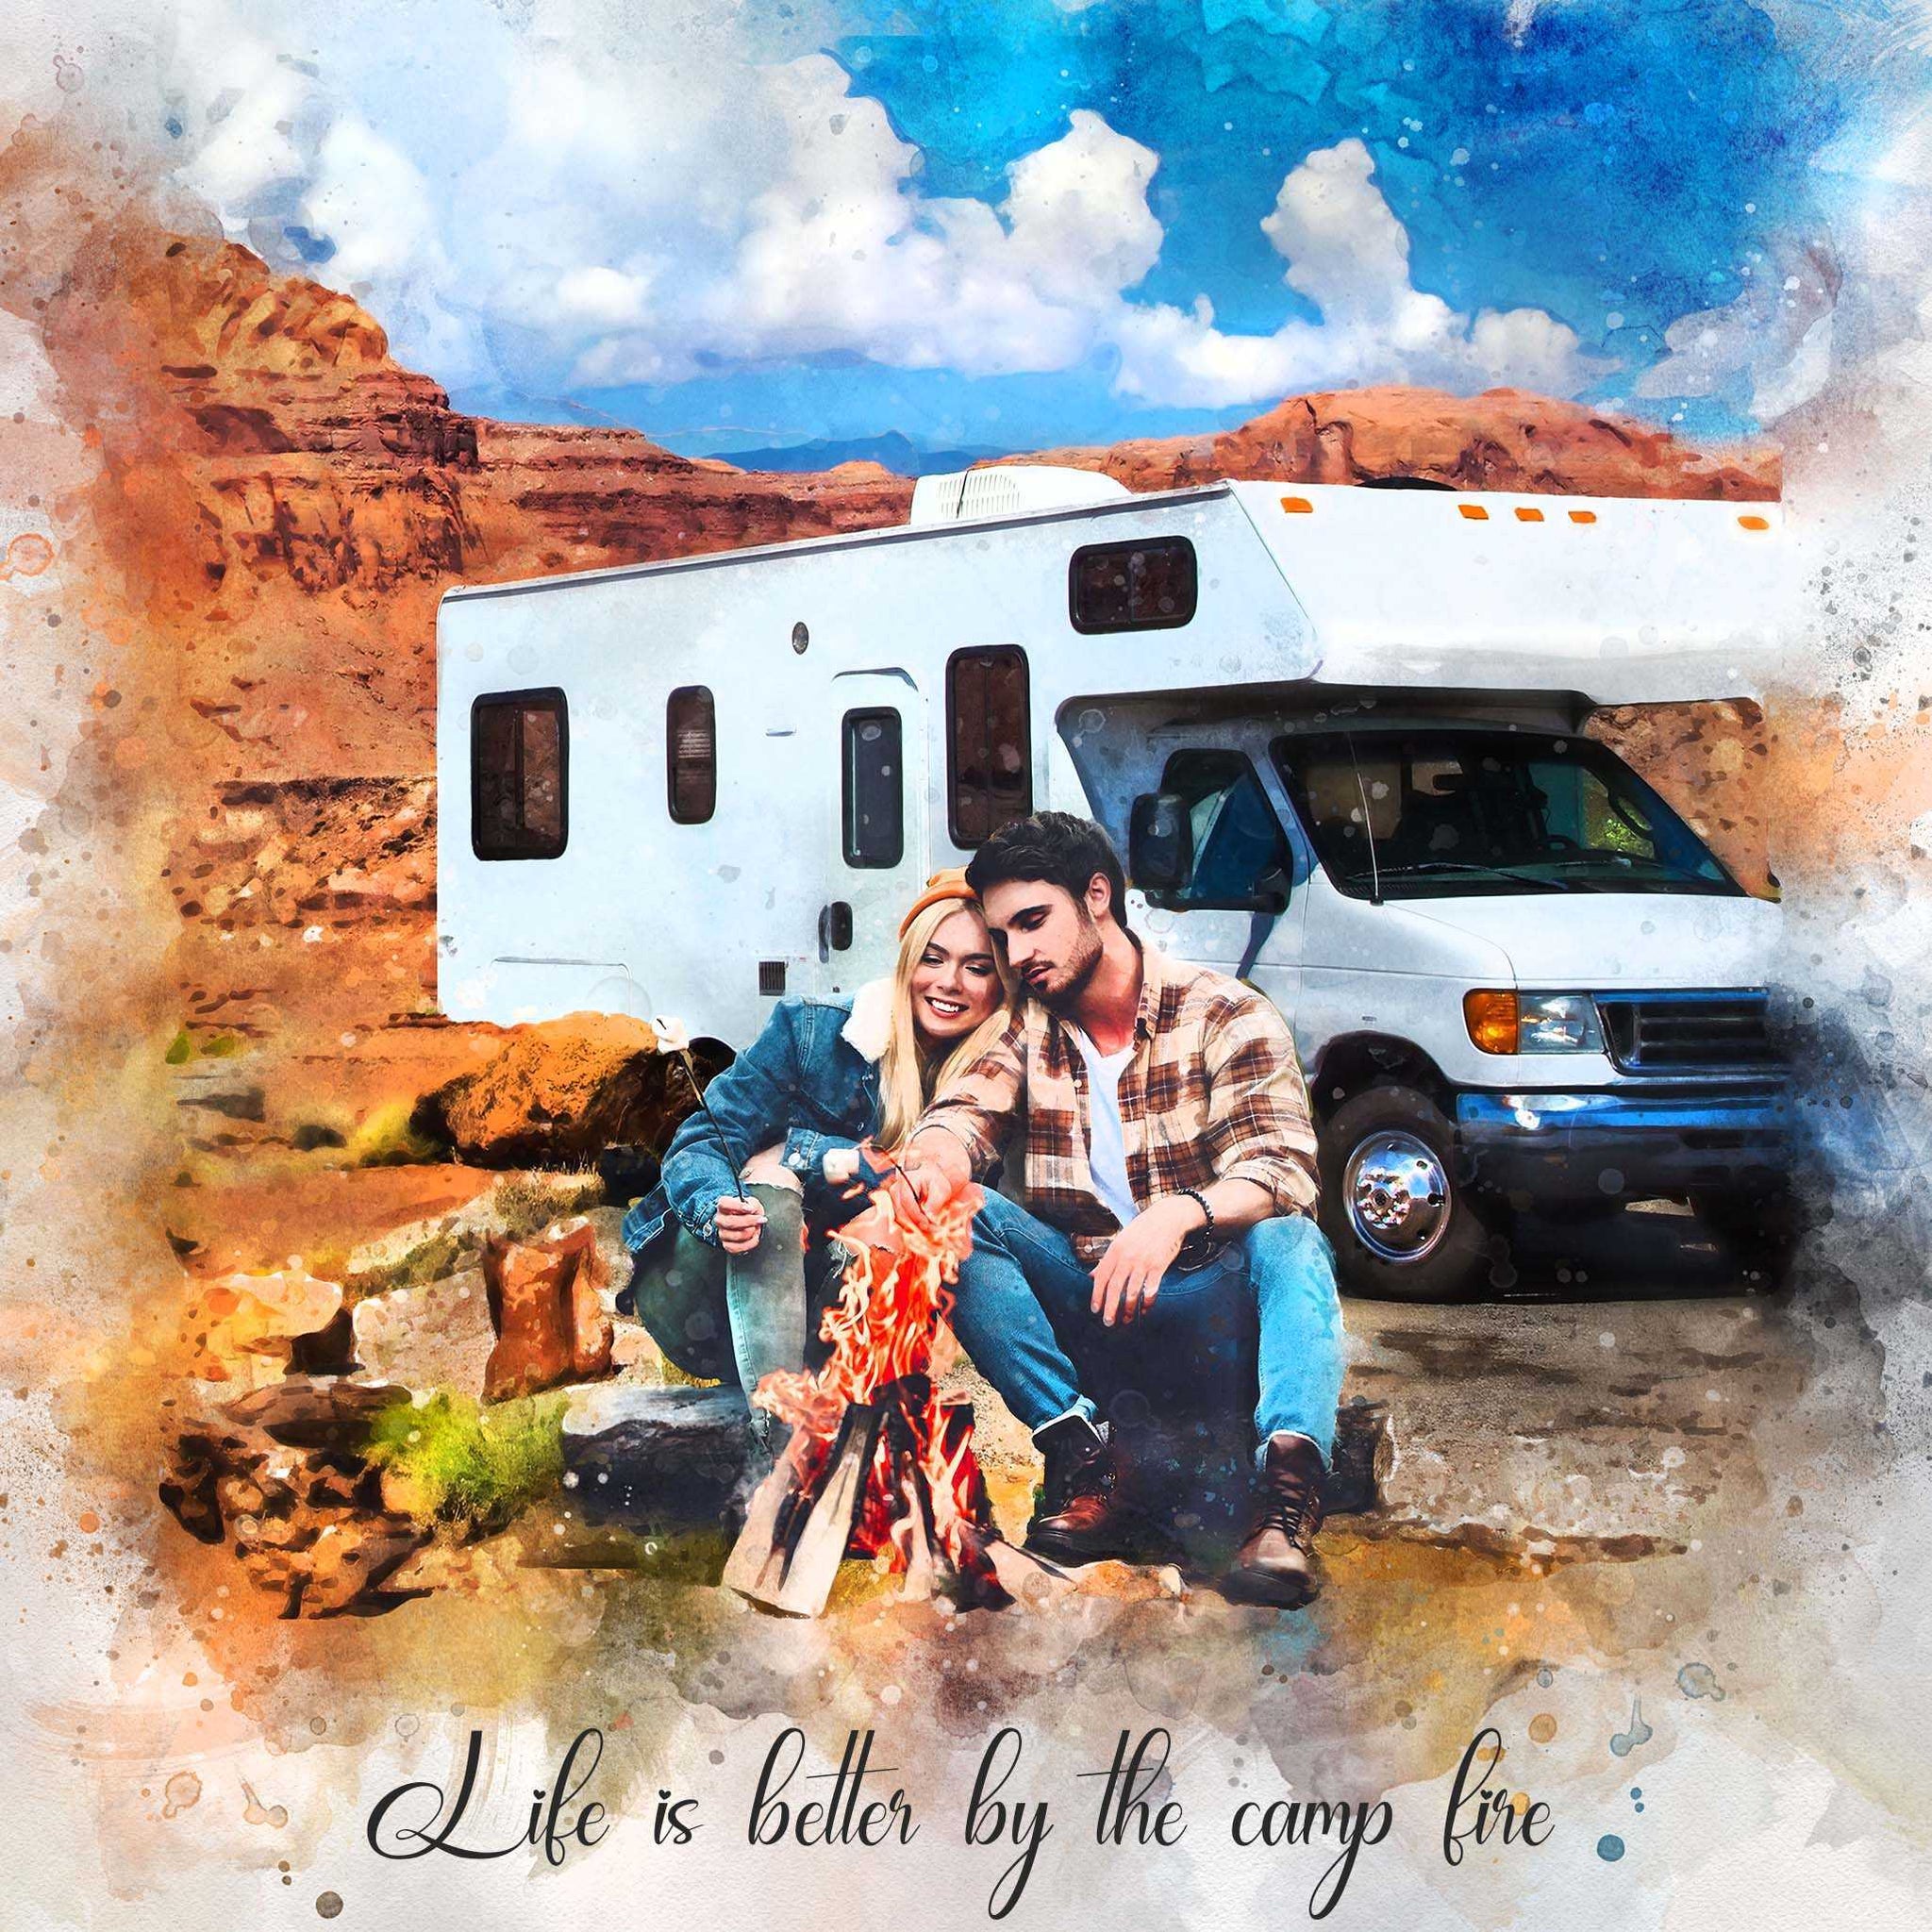 Camping Gifts 🏕️ Camping Gift Ideas for Motorhome Owners and RV Lovers | personalized Spectacular Scenic Camping Portrait | Camping Gift Ideas for Motorhome Owners and RV Lovers | Camping Gift |Motorhome Gift, Custom RV Gift - FromPicToArt